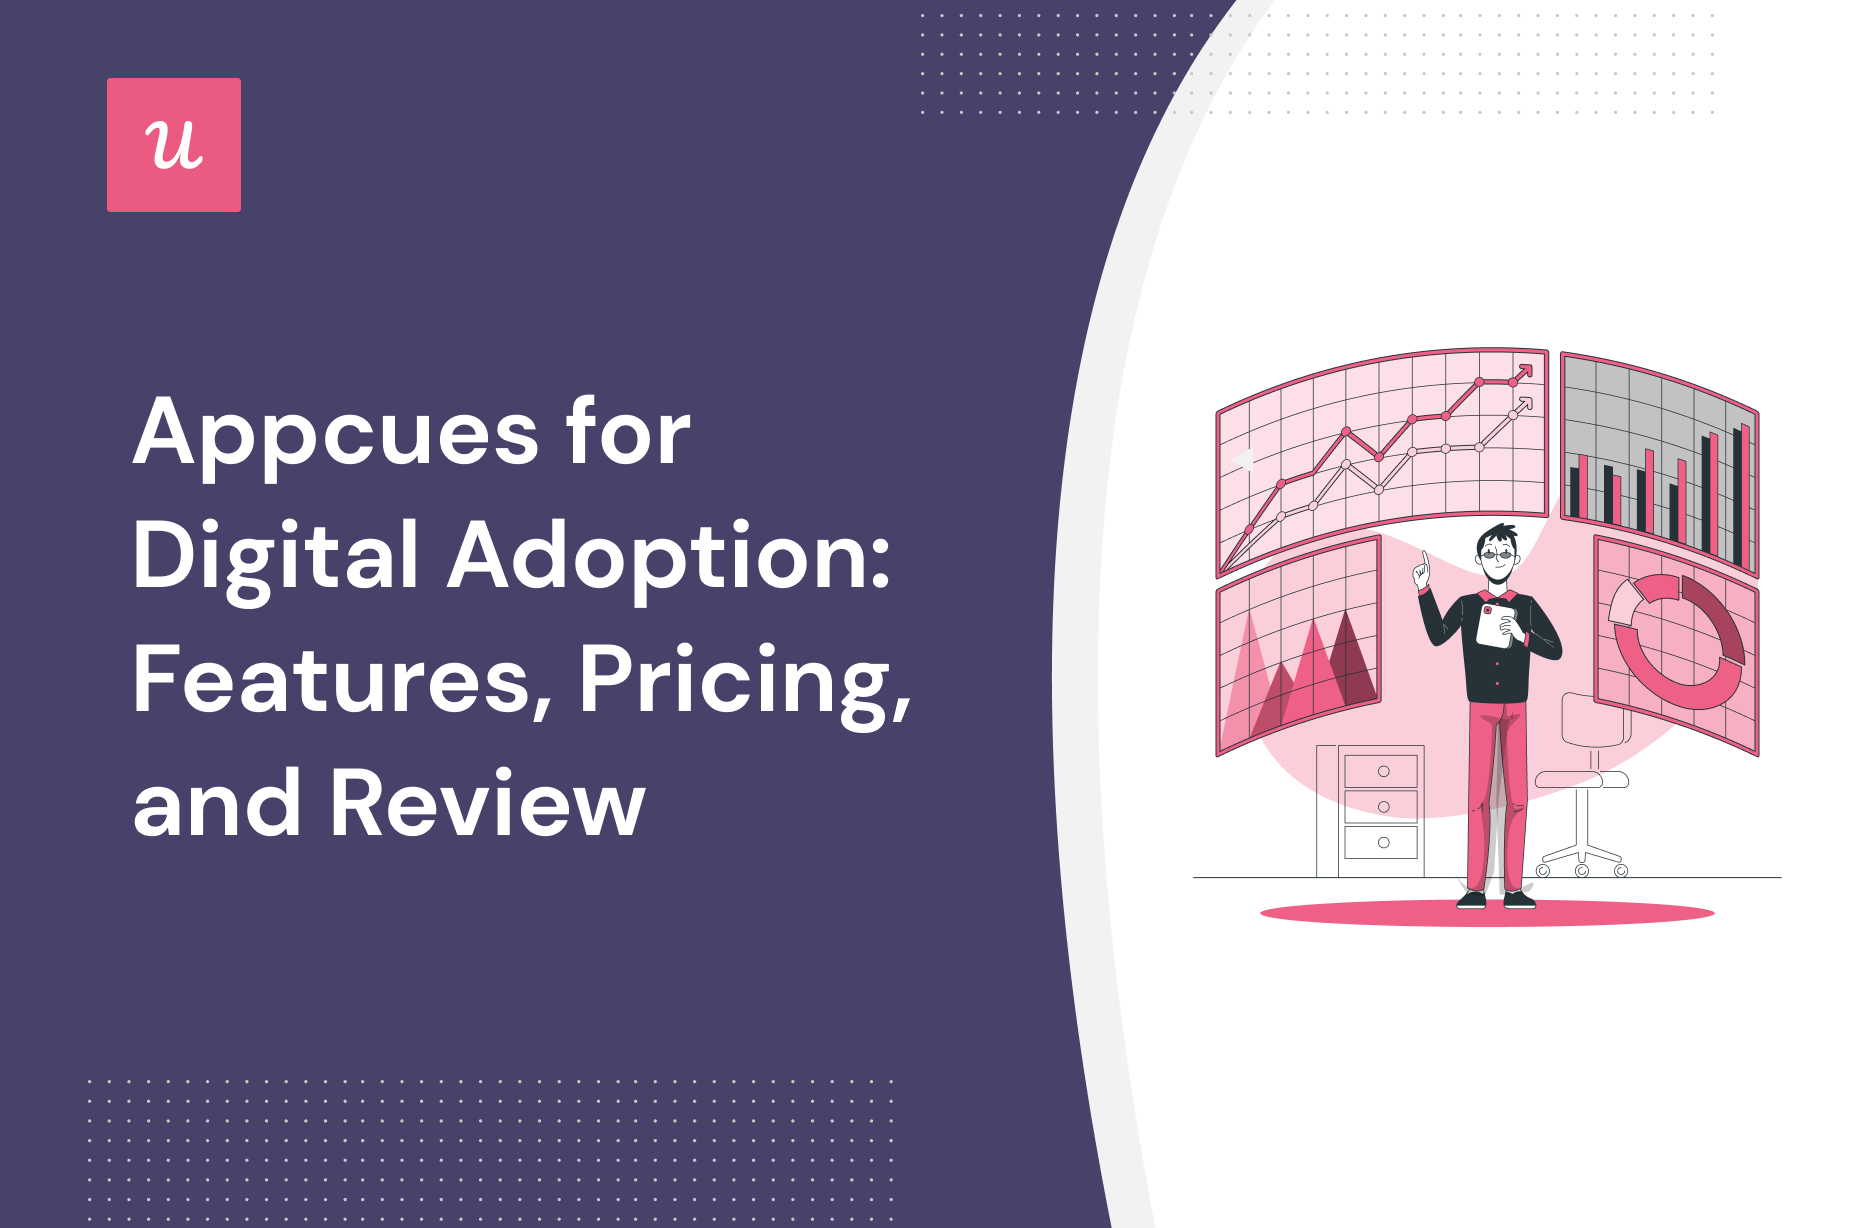 Appcues for Digital Adoption: Features, Pricing, and Review